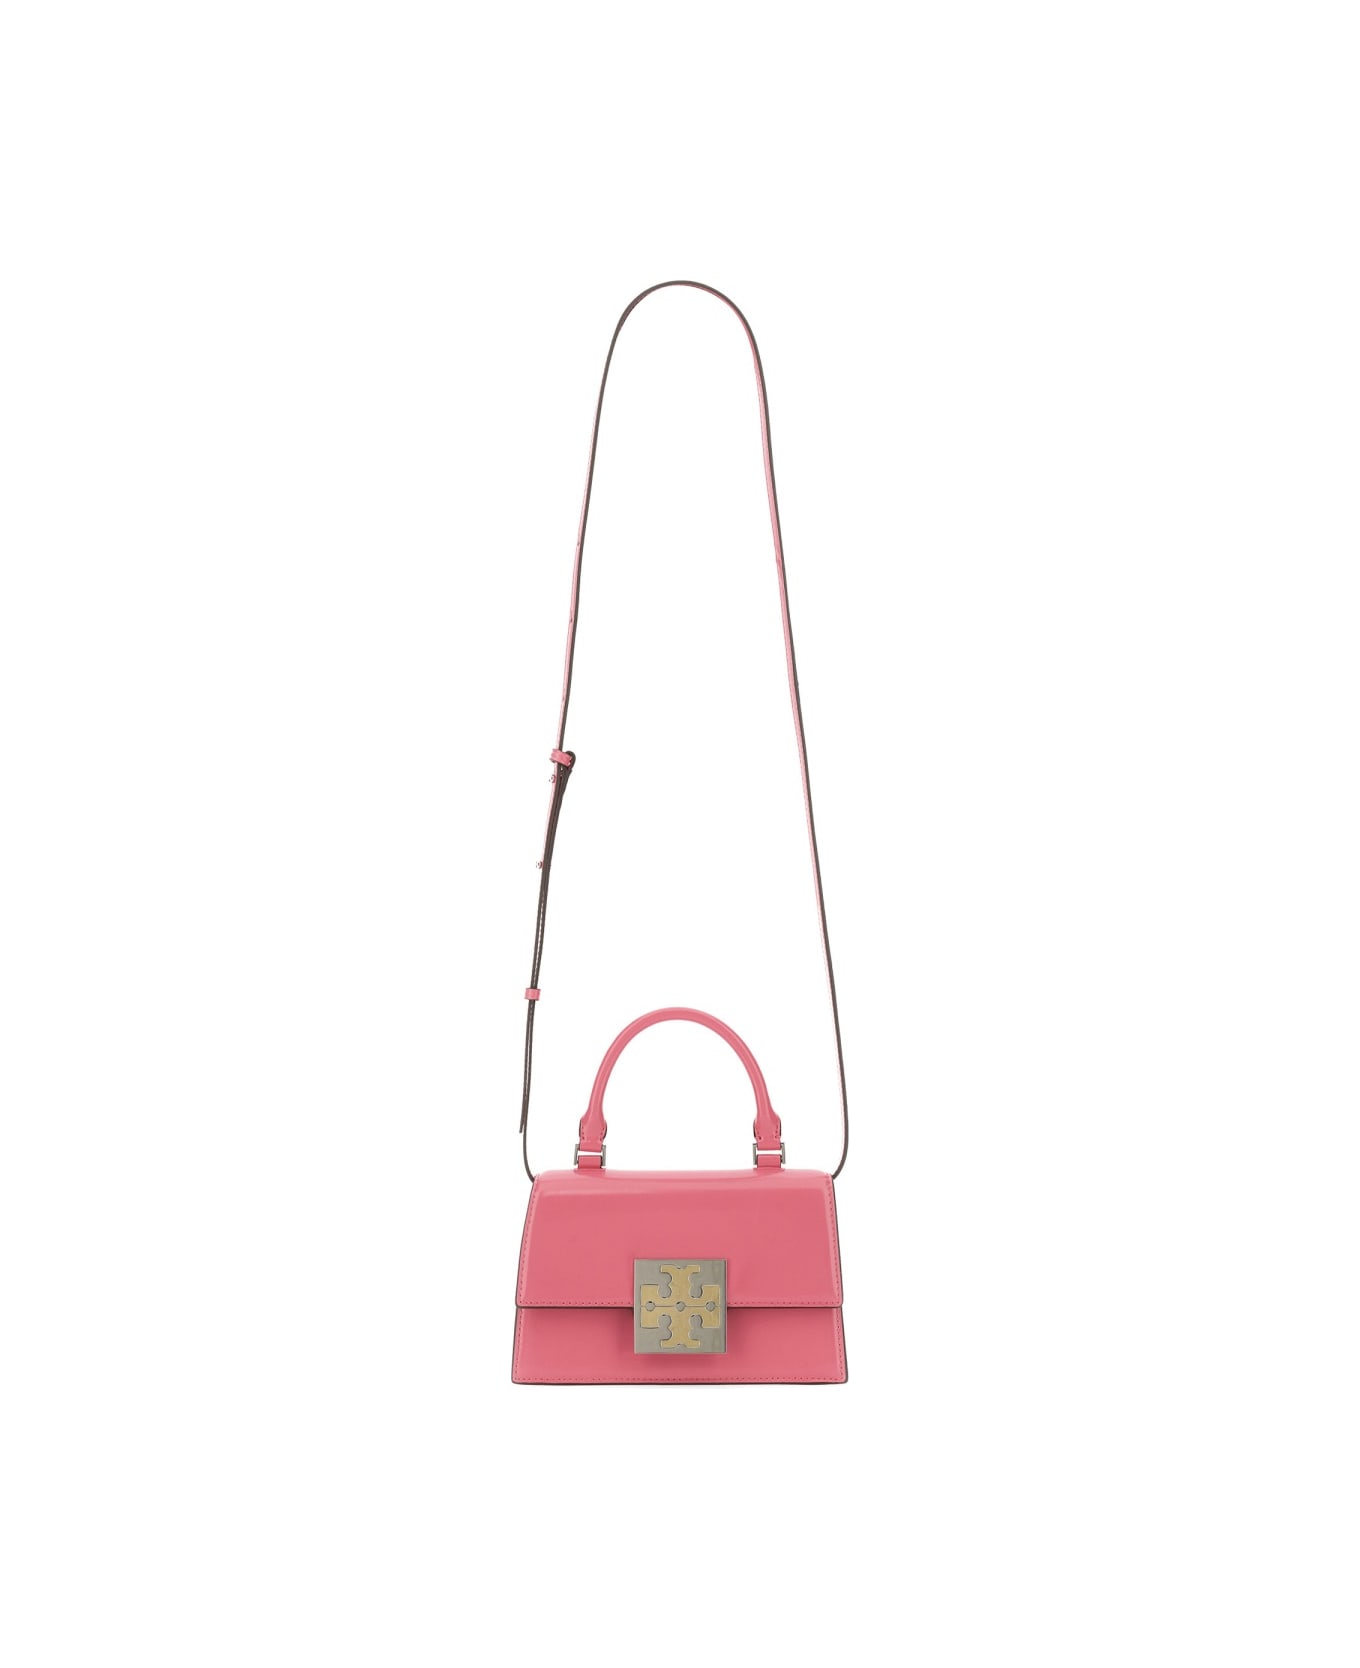 Tory Burch Mini Brushed Leather Bag - PINK